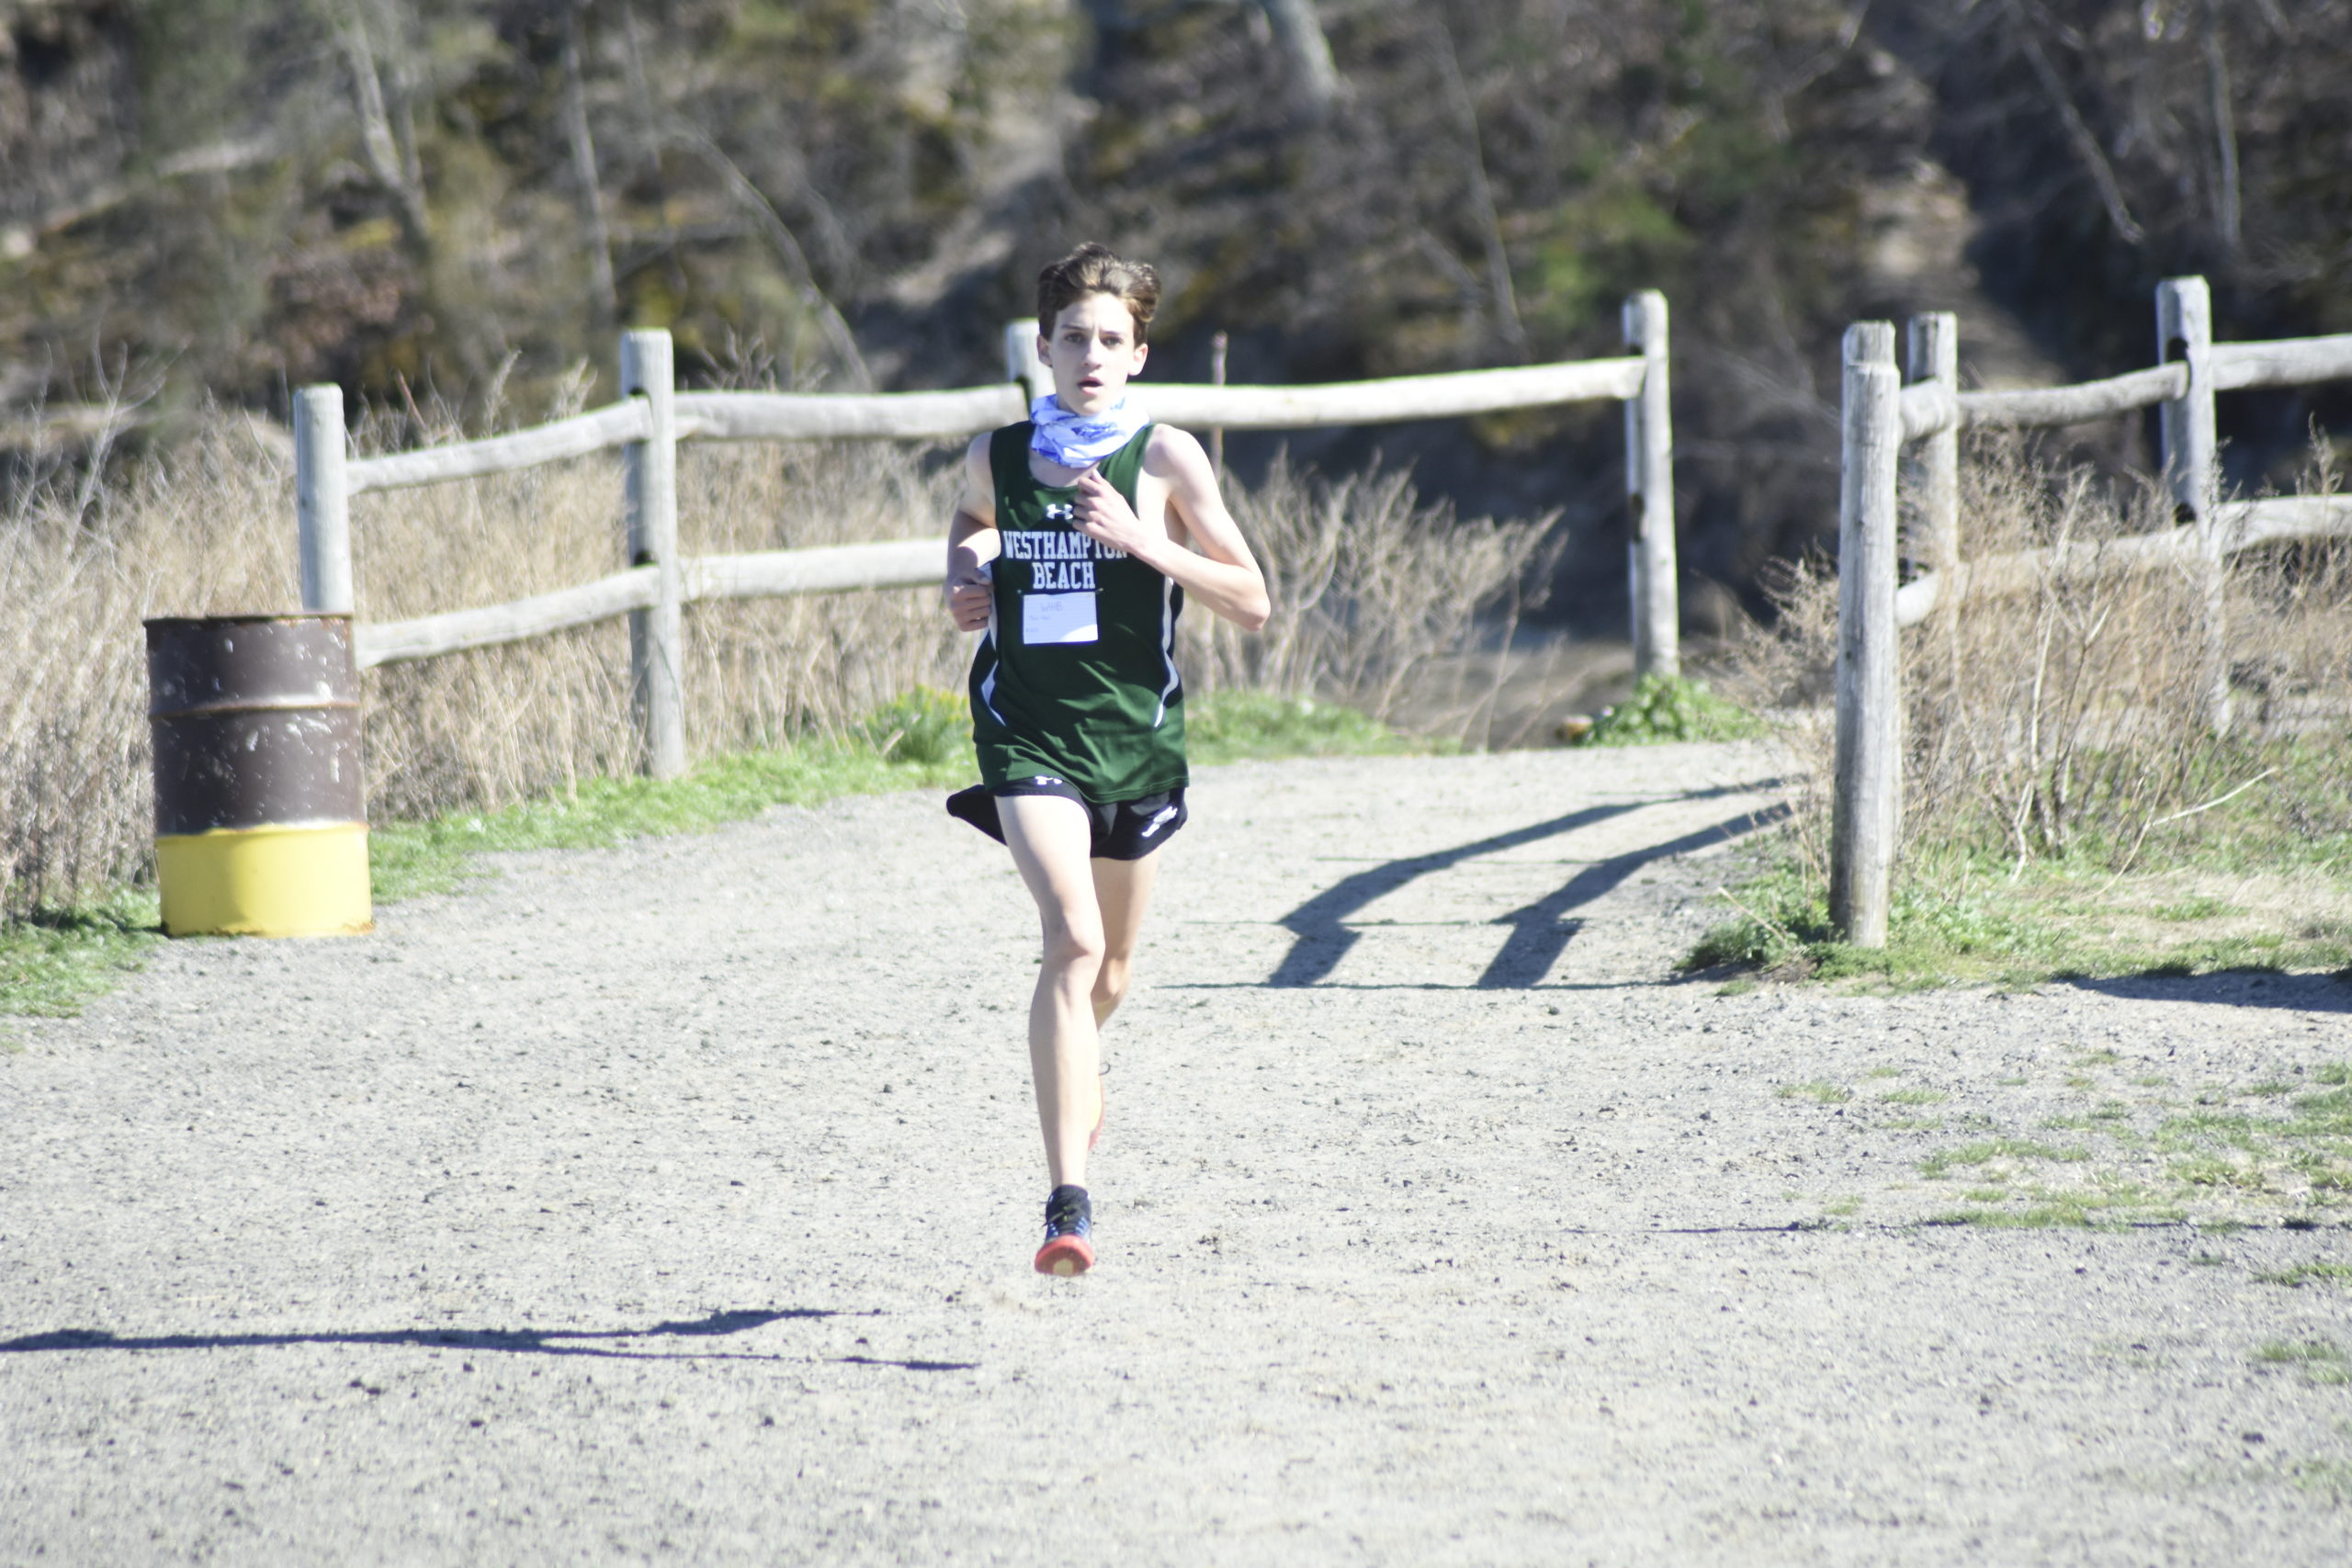 Westhampton Beach sophomore Trevor Hayes placed second overall.